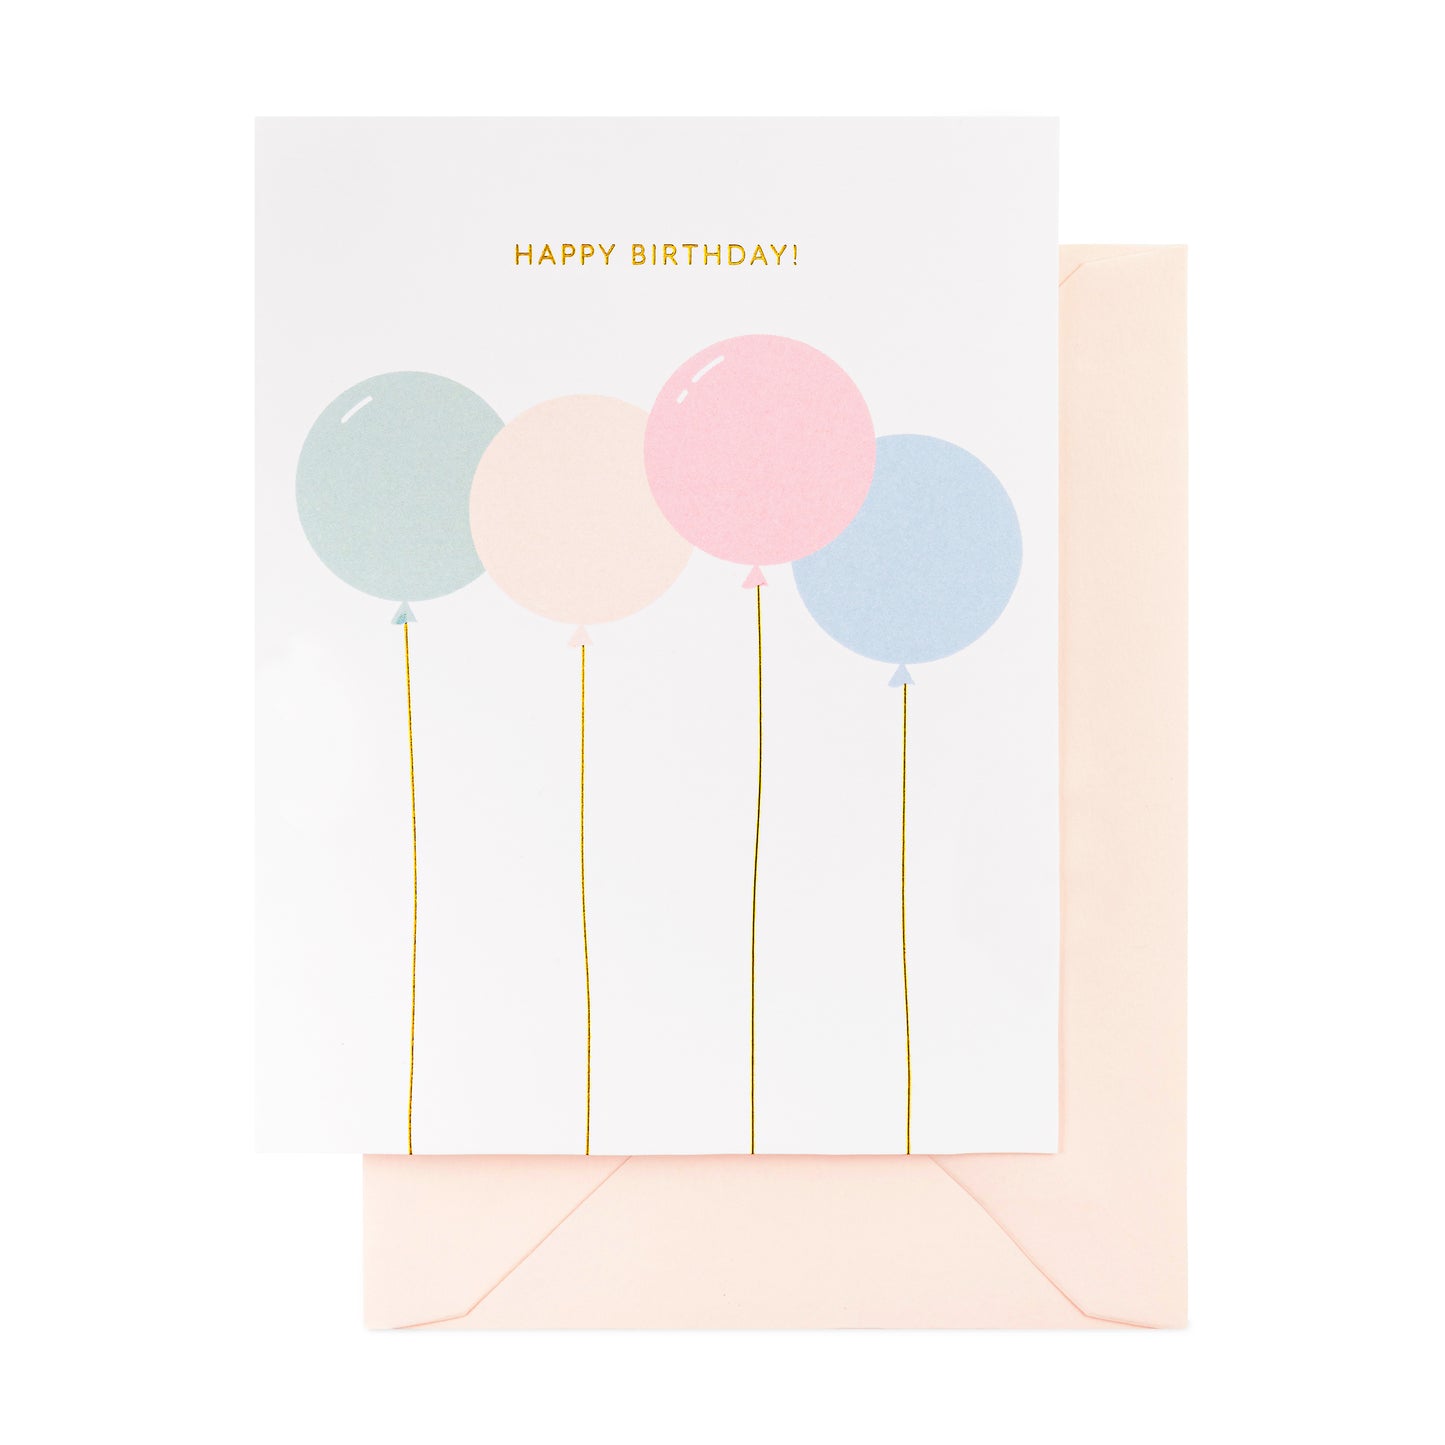 Colorful Balloons printed with Happy Birthday and paired a pink envelope